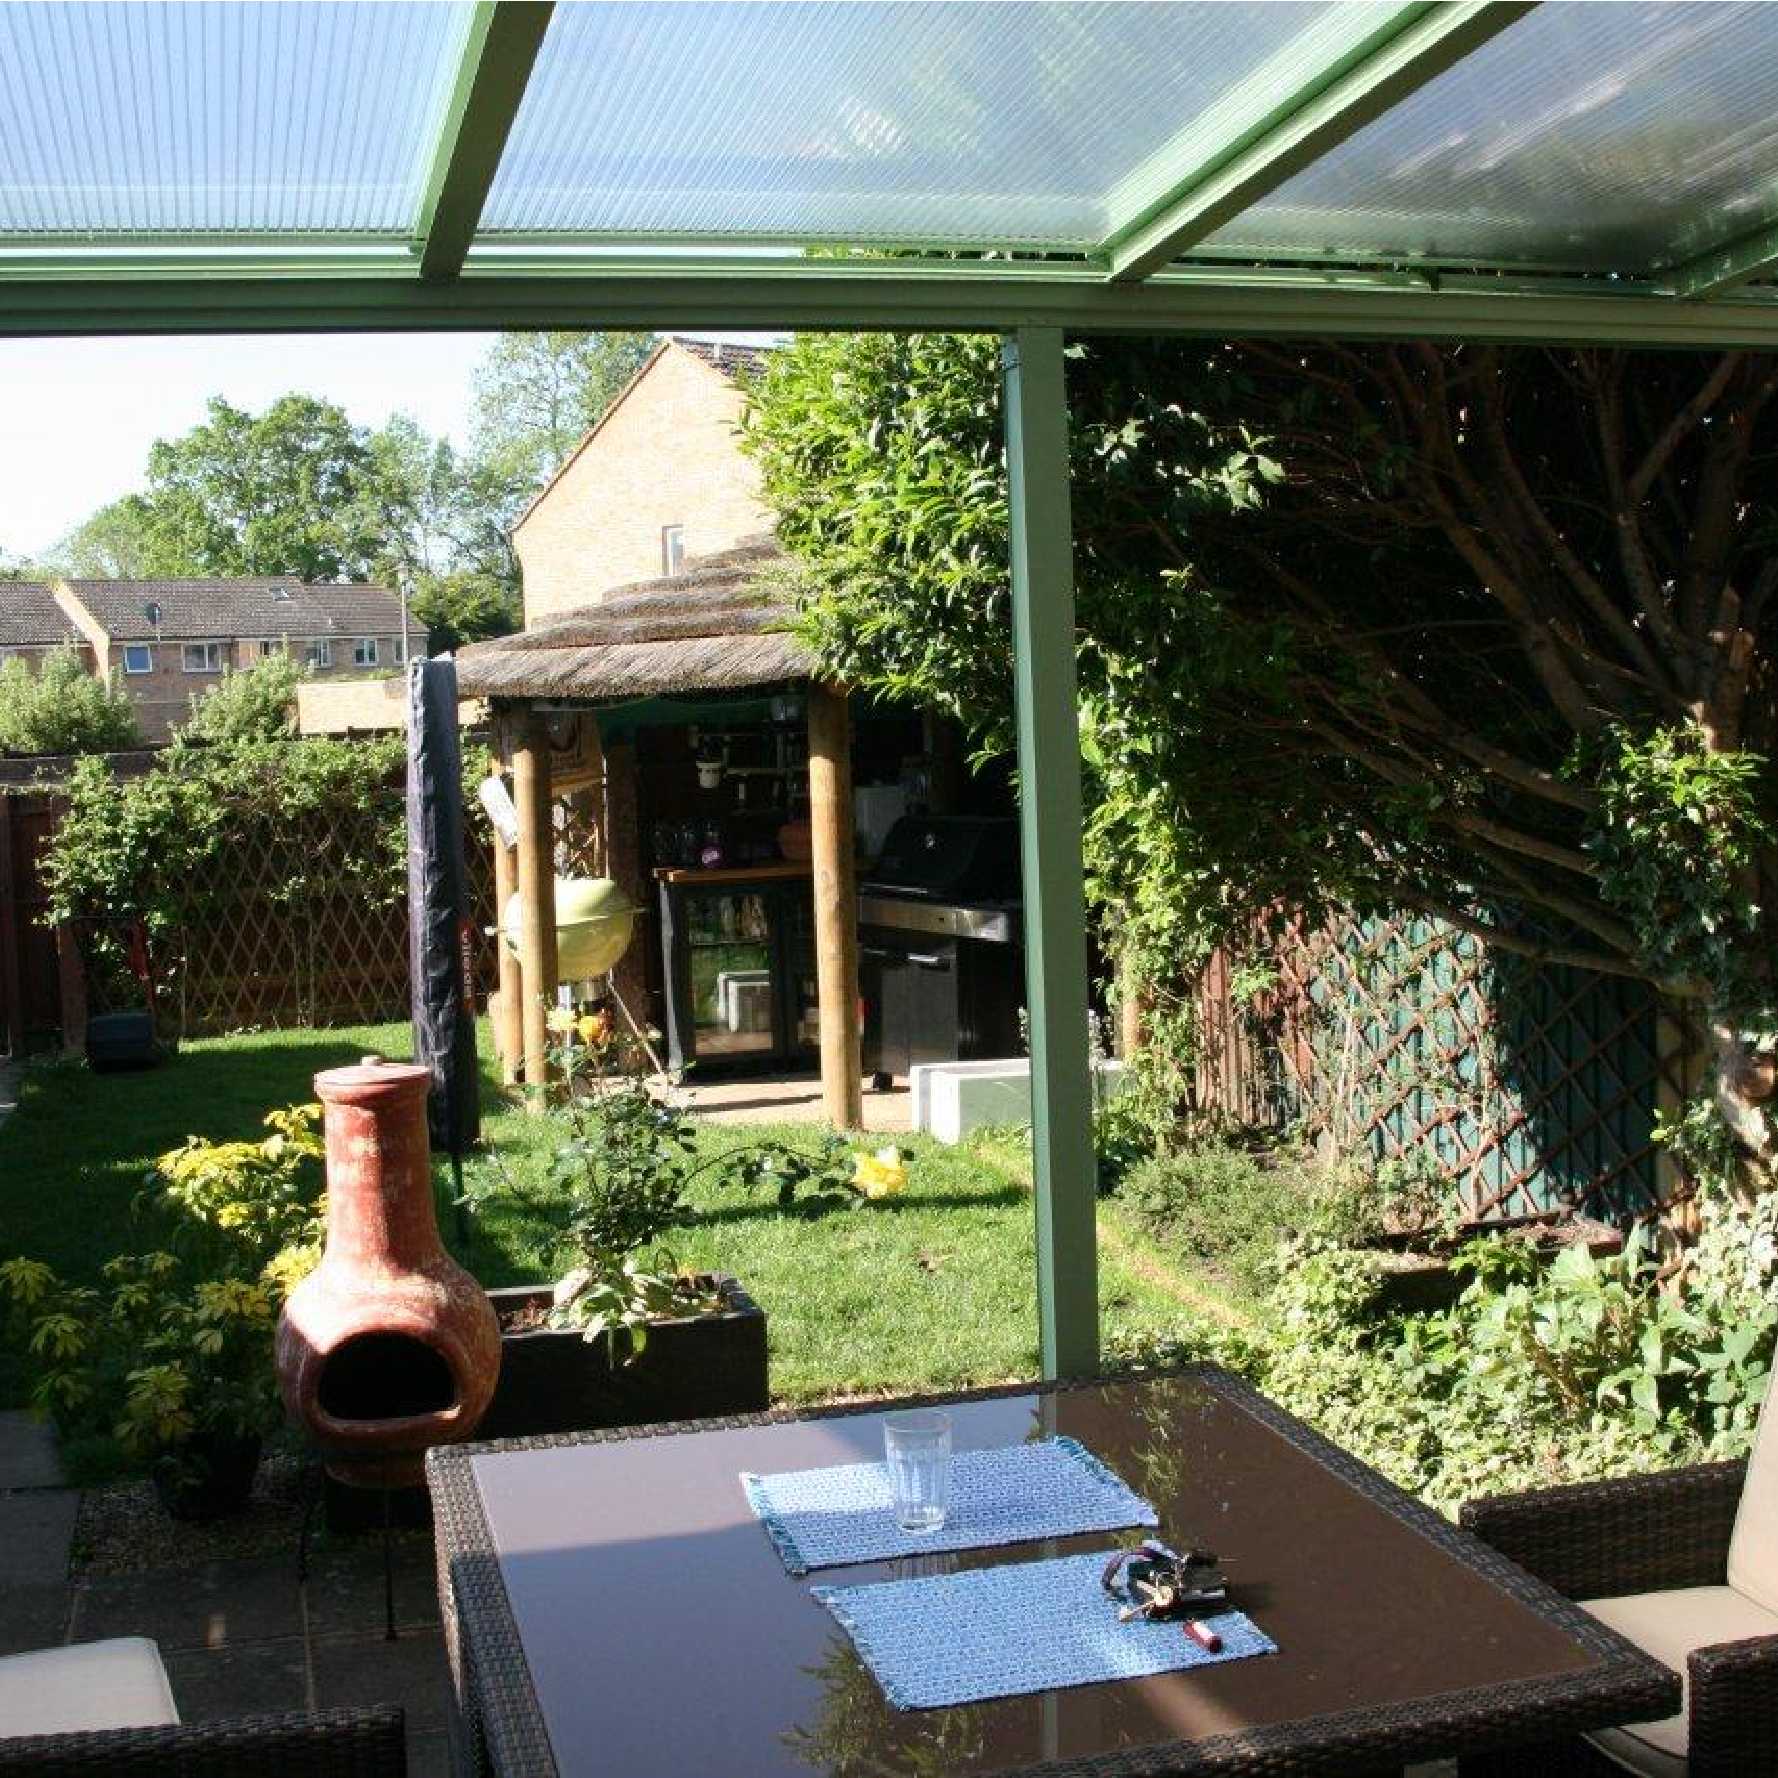 Affordable Omega Smart Lean-To Canopy, White with 16mm Polycarbonate Glazing - 8.4m (W) x 3.5m (P), (4) Supporting Posts